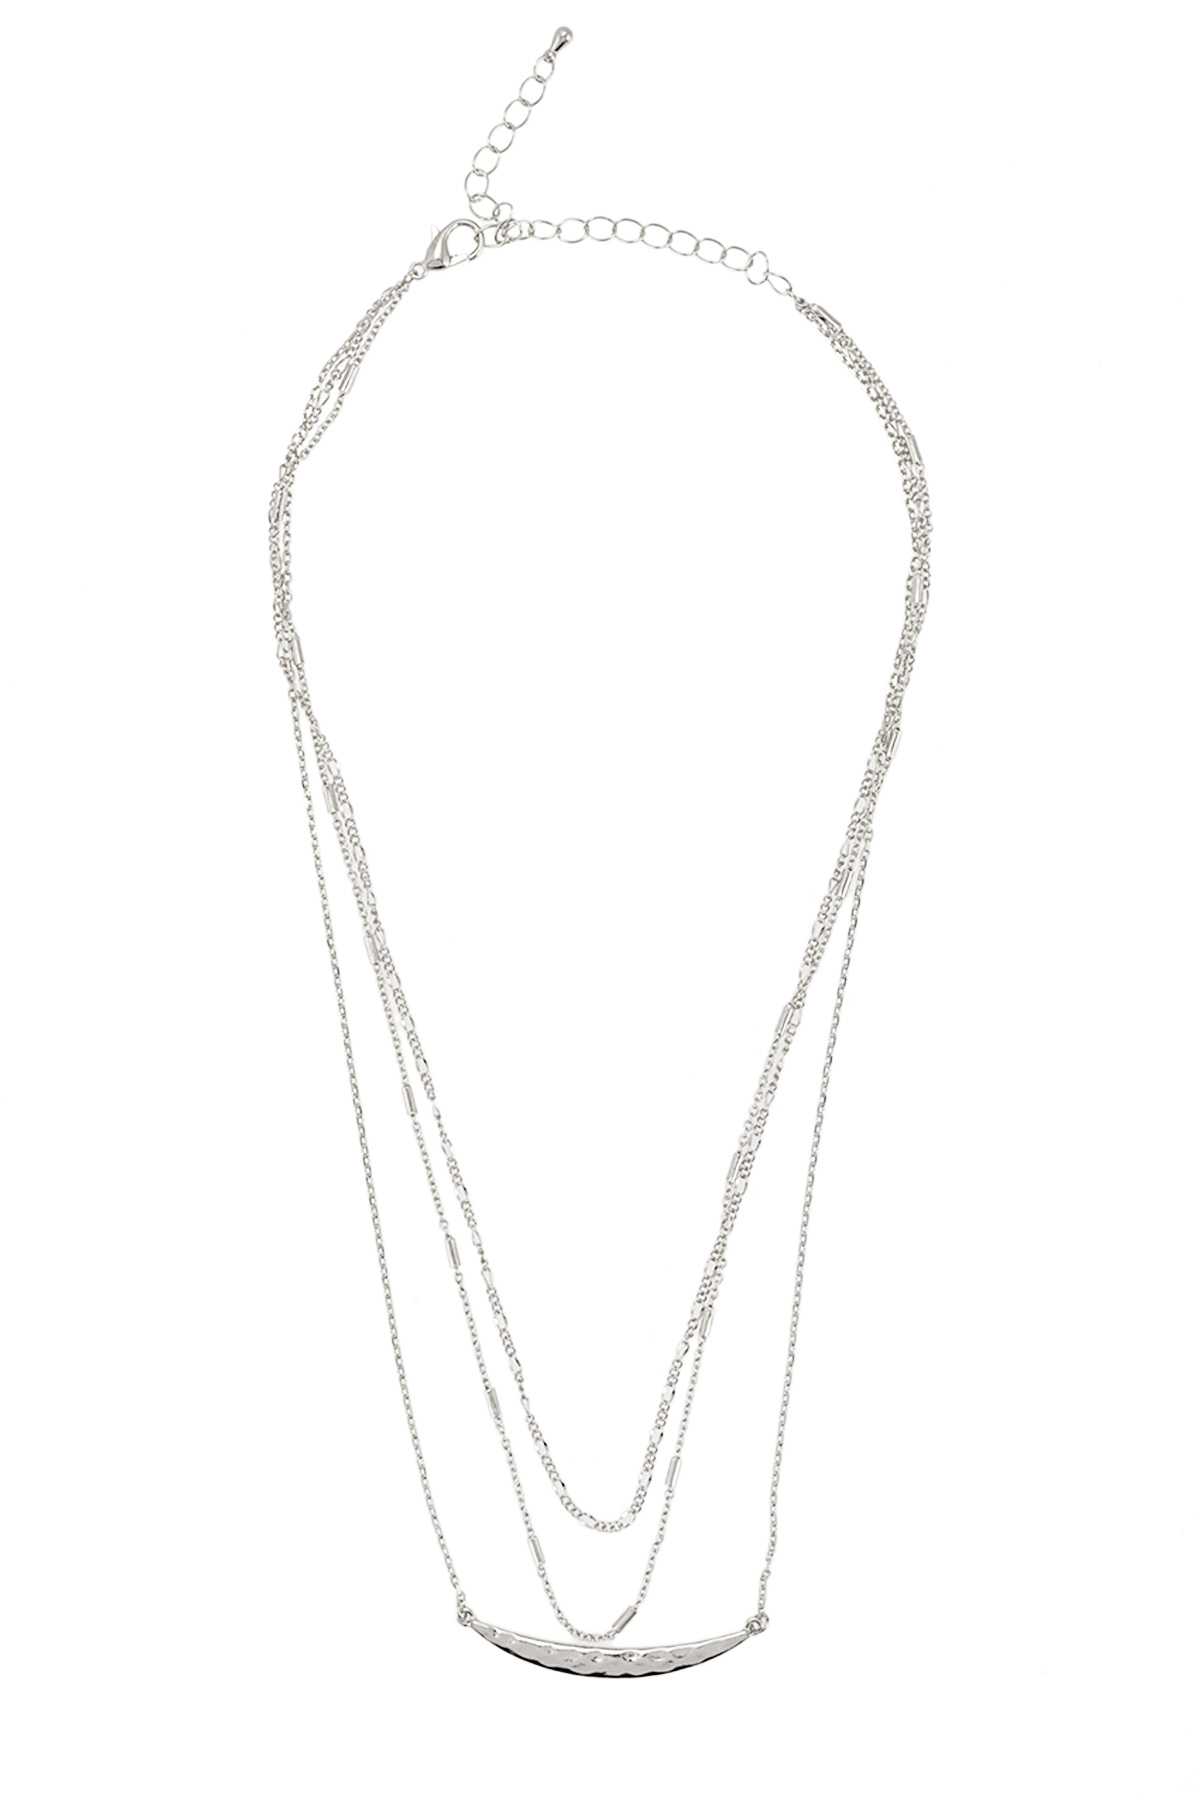 Textured Curvy Bar Chain Layered Necklace